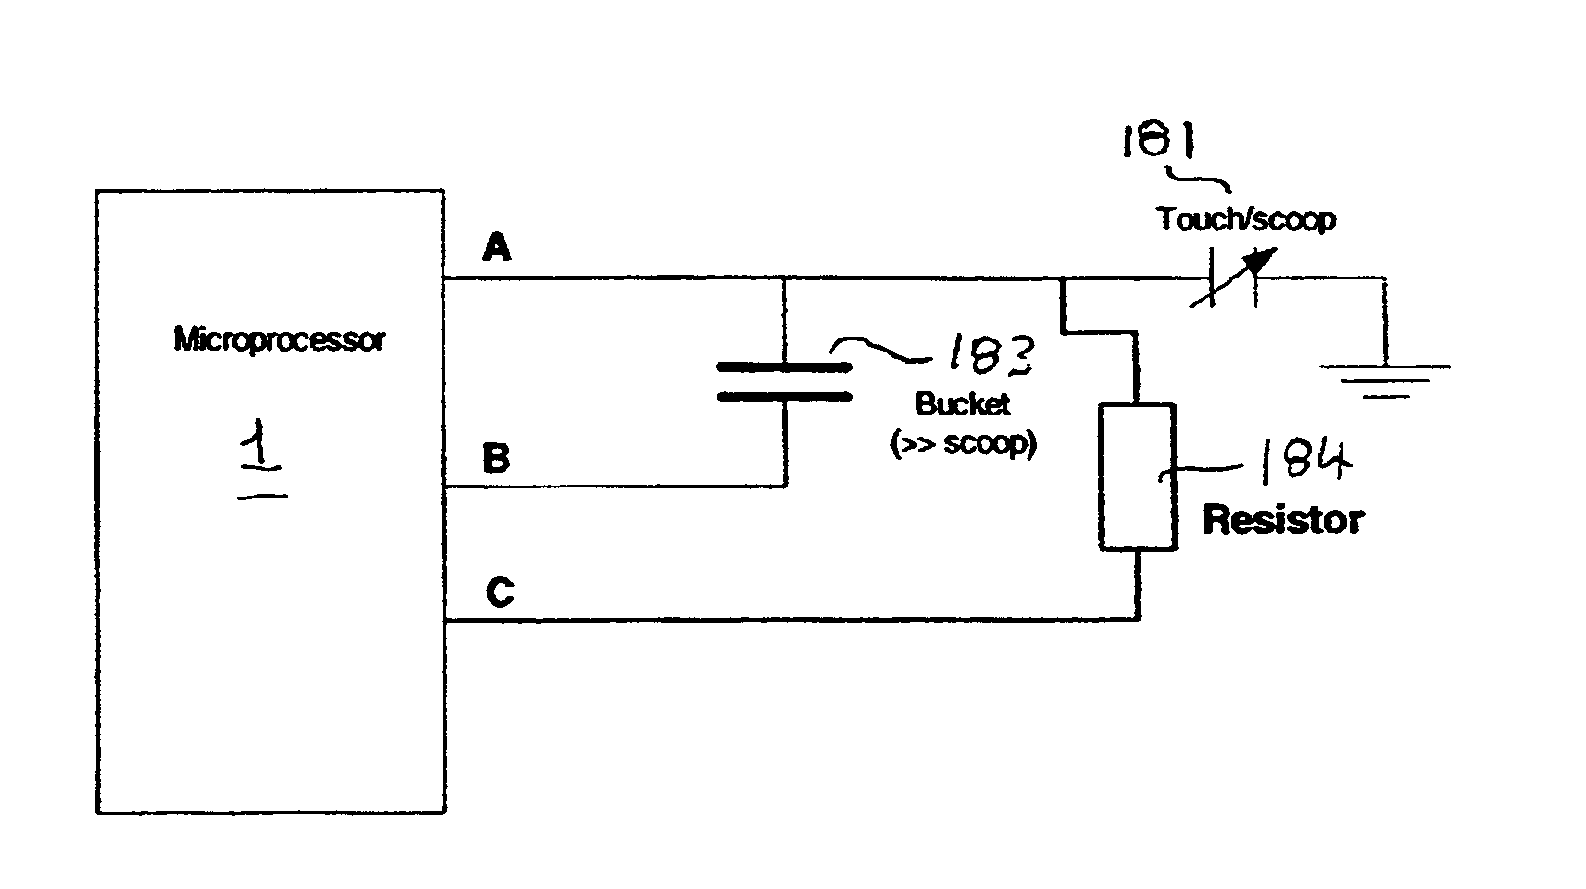 Capacitive sensing employing a repeatable offset charge